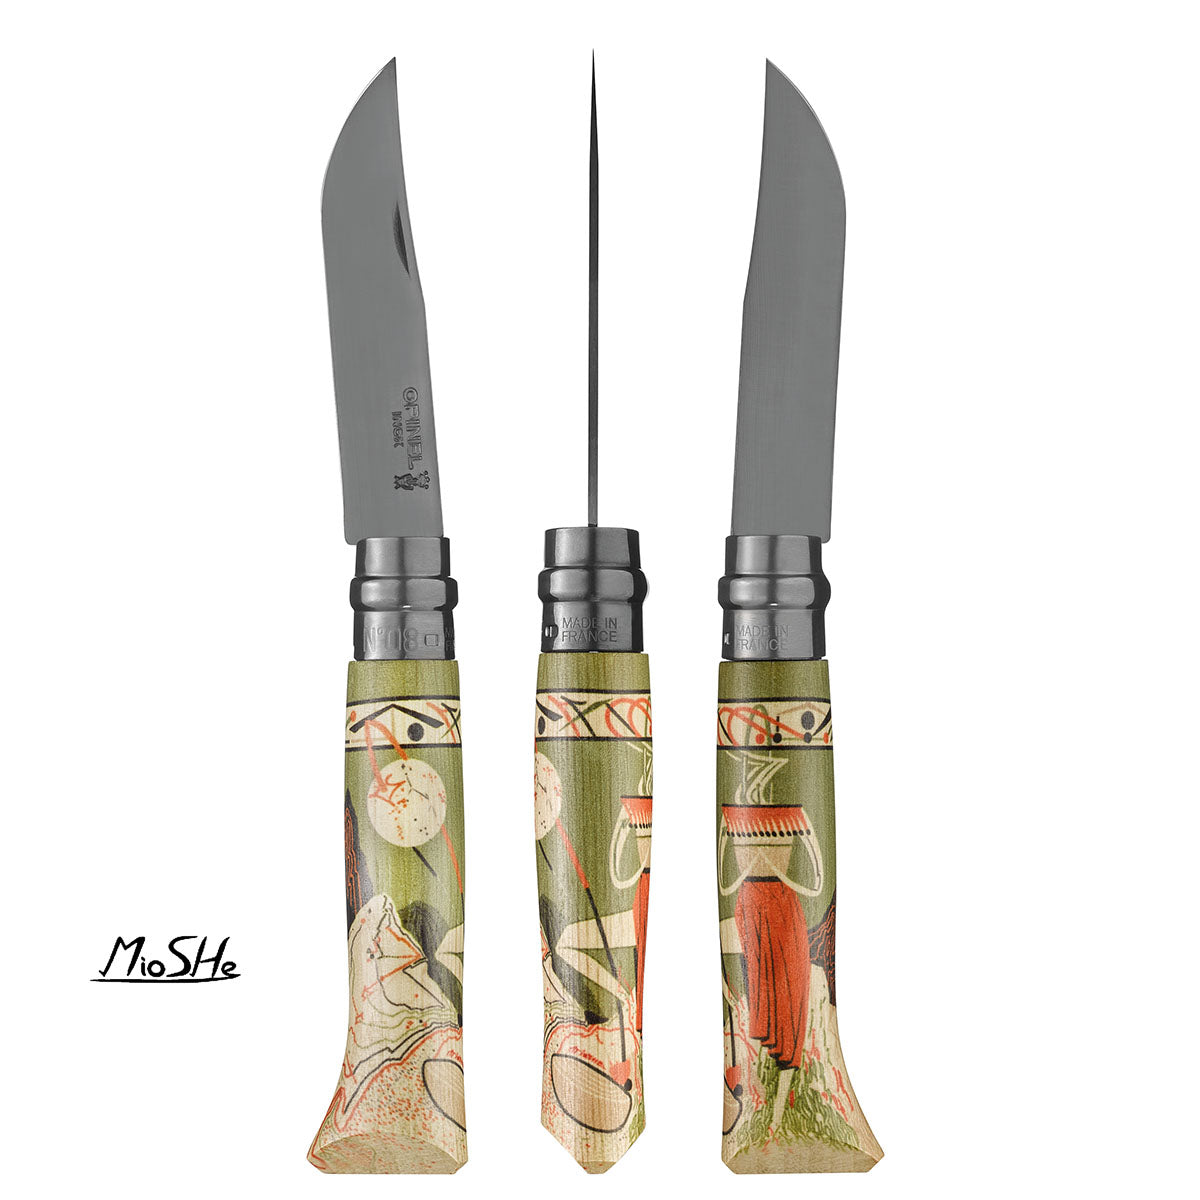 Opinel No. 8 ( Review & Buying Guide) 2021 - Task & Purpose